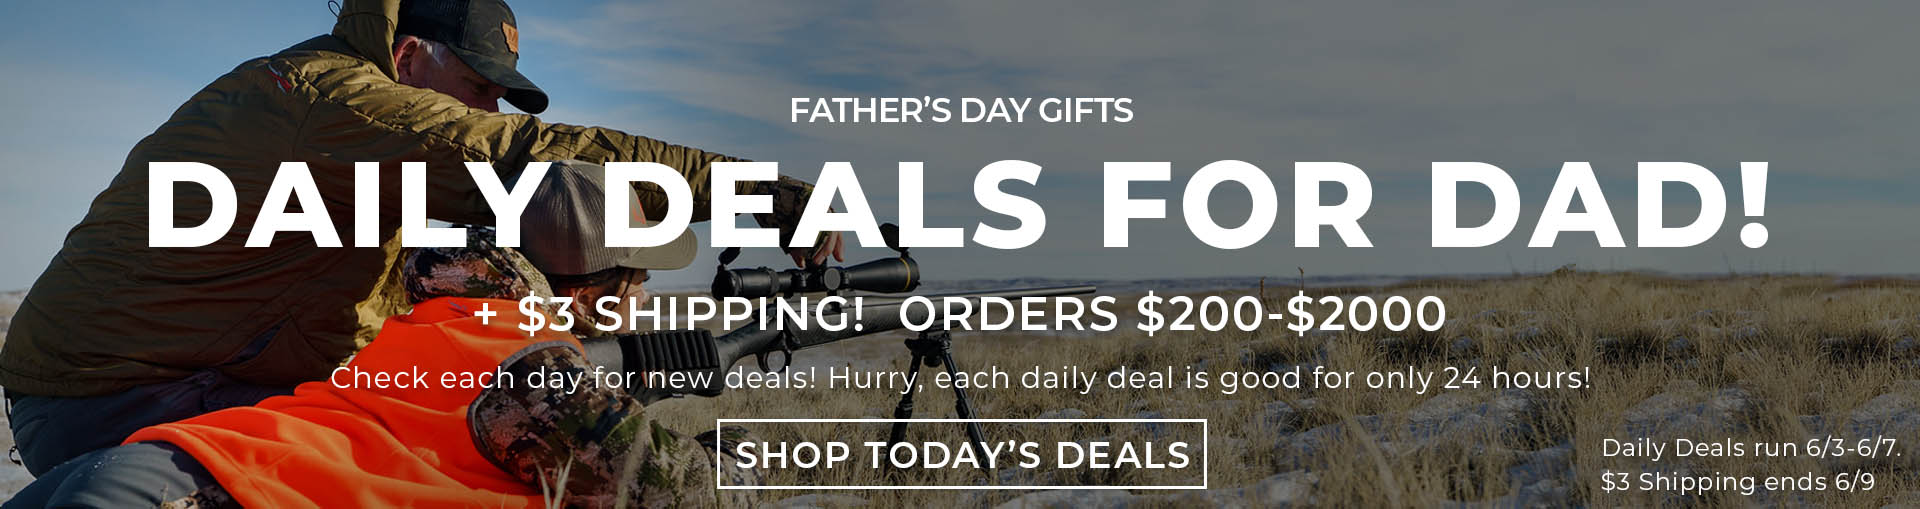 Daily Deals for Dad + $3 Shipping on Orders $200=$2000